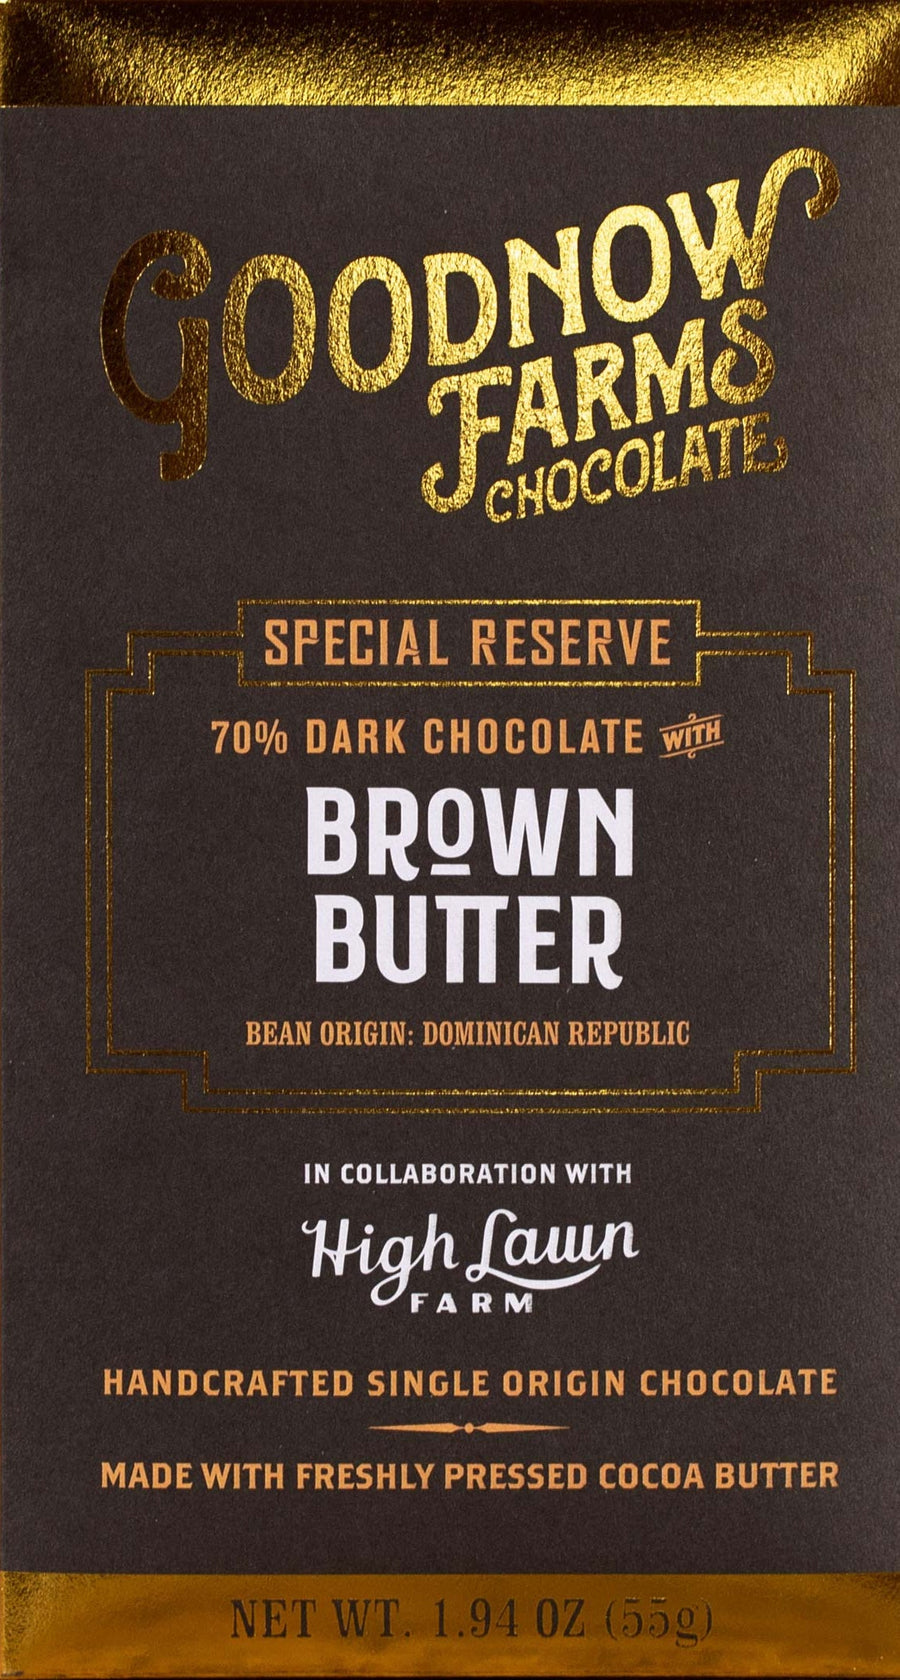 Goodnow Farms Dominican Republic 70% Dark Chocolate with browned butter - Chocolate Collective Canada